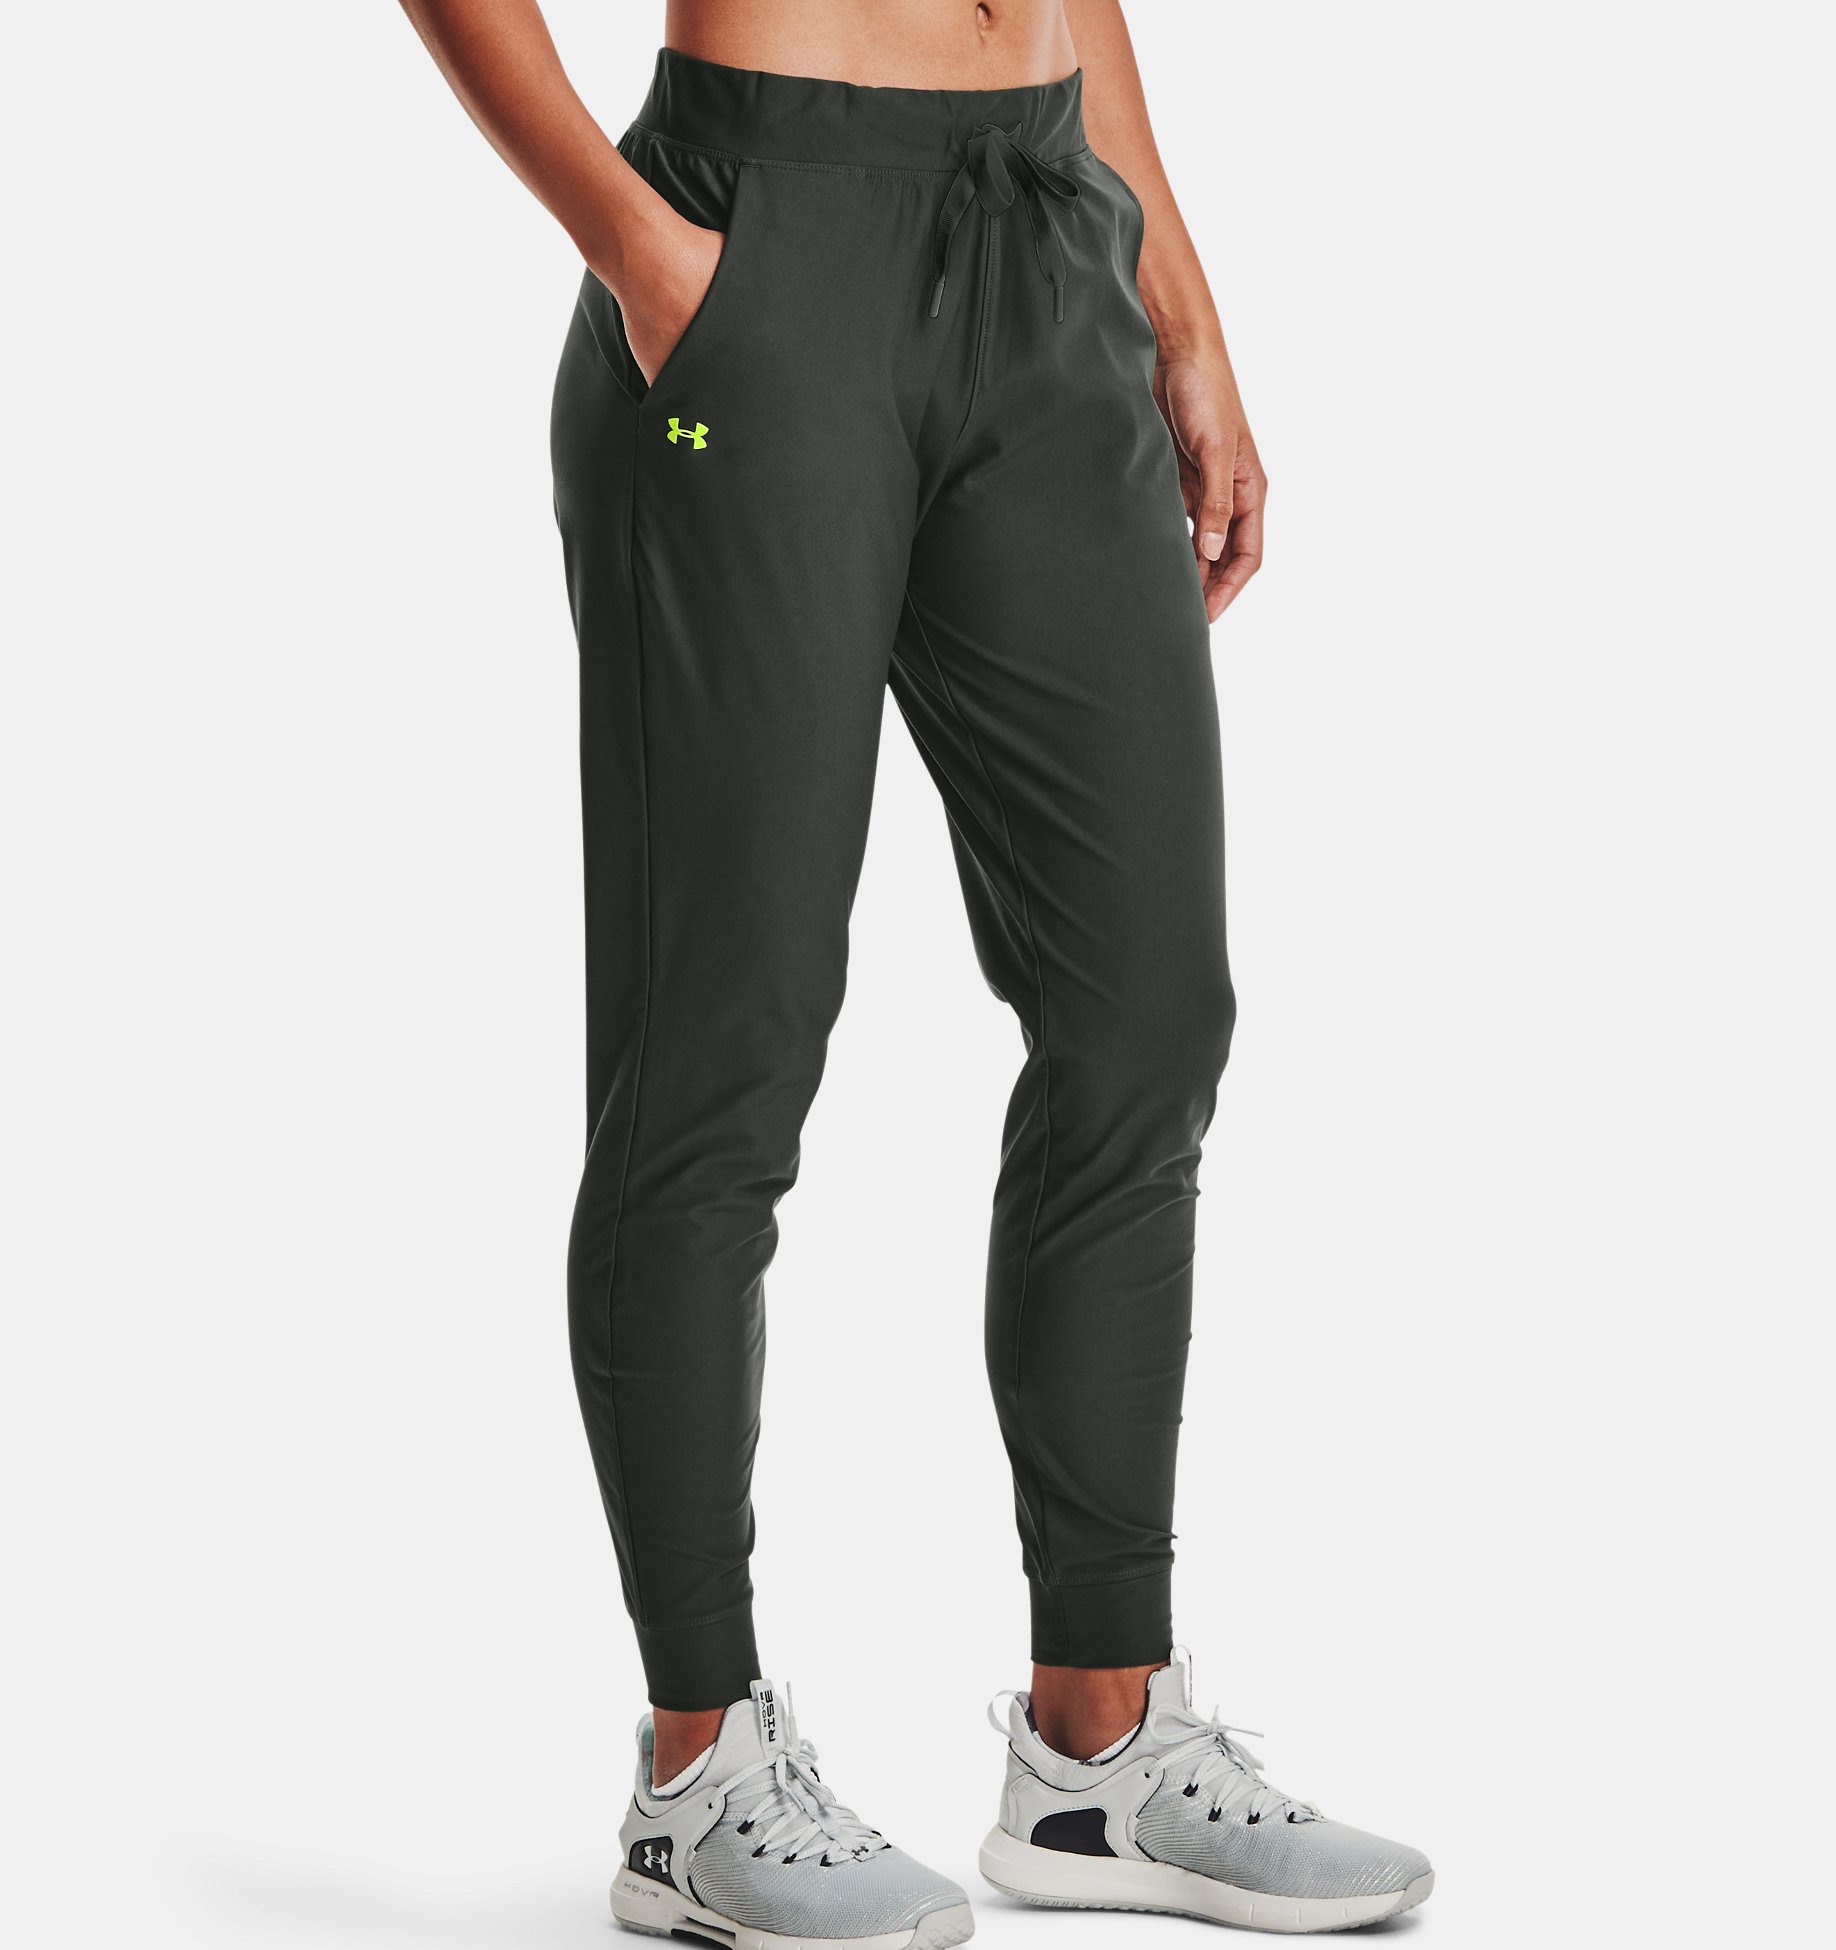 Under Armour Women's Vanish Joggers Black New With Tags Size XS 